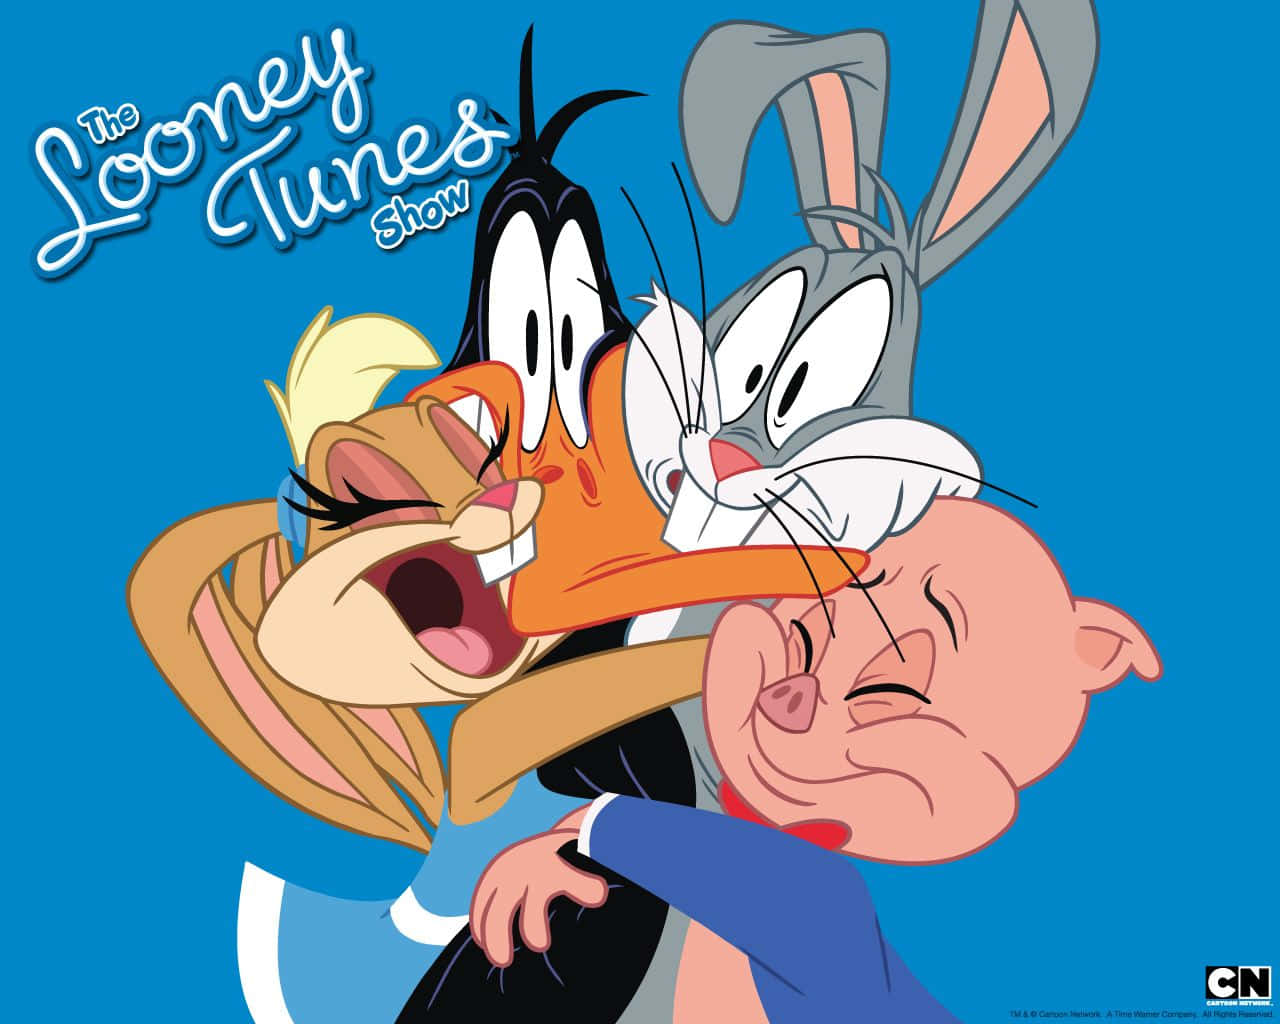 It's all fun and games with Looney Tunes!